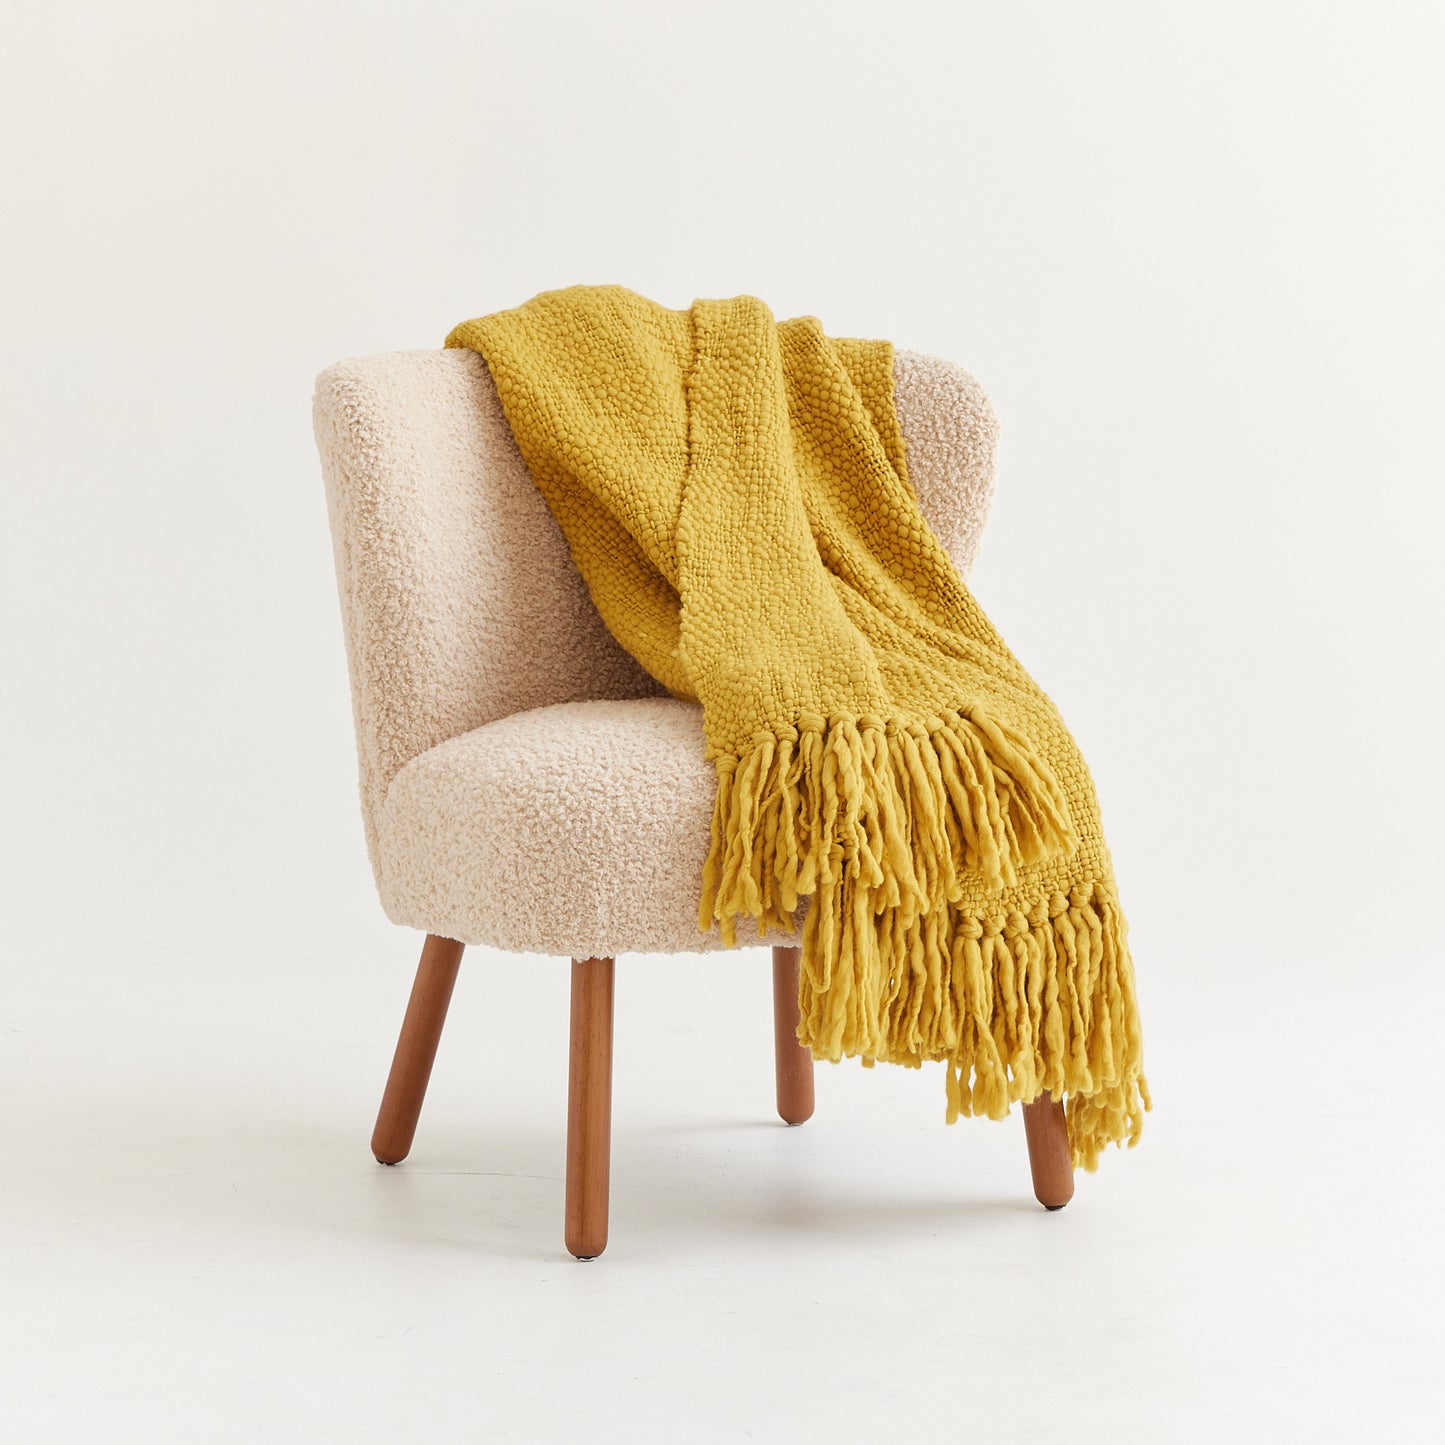 Merino Wool Blanket - Handwoven in Uruguay for Luxurious Texture and Minimal Style